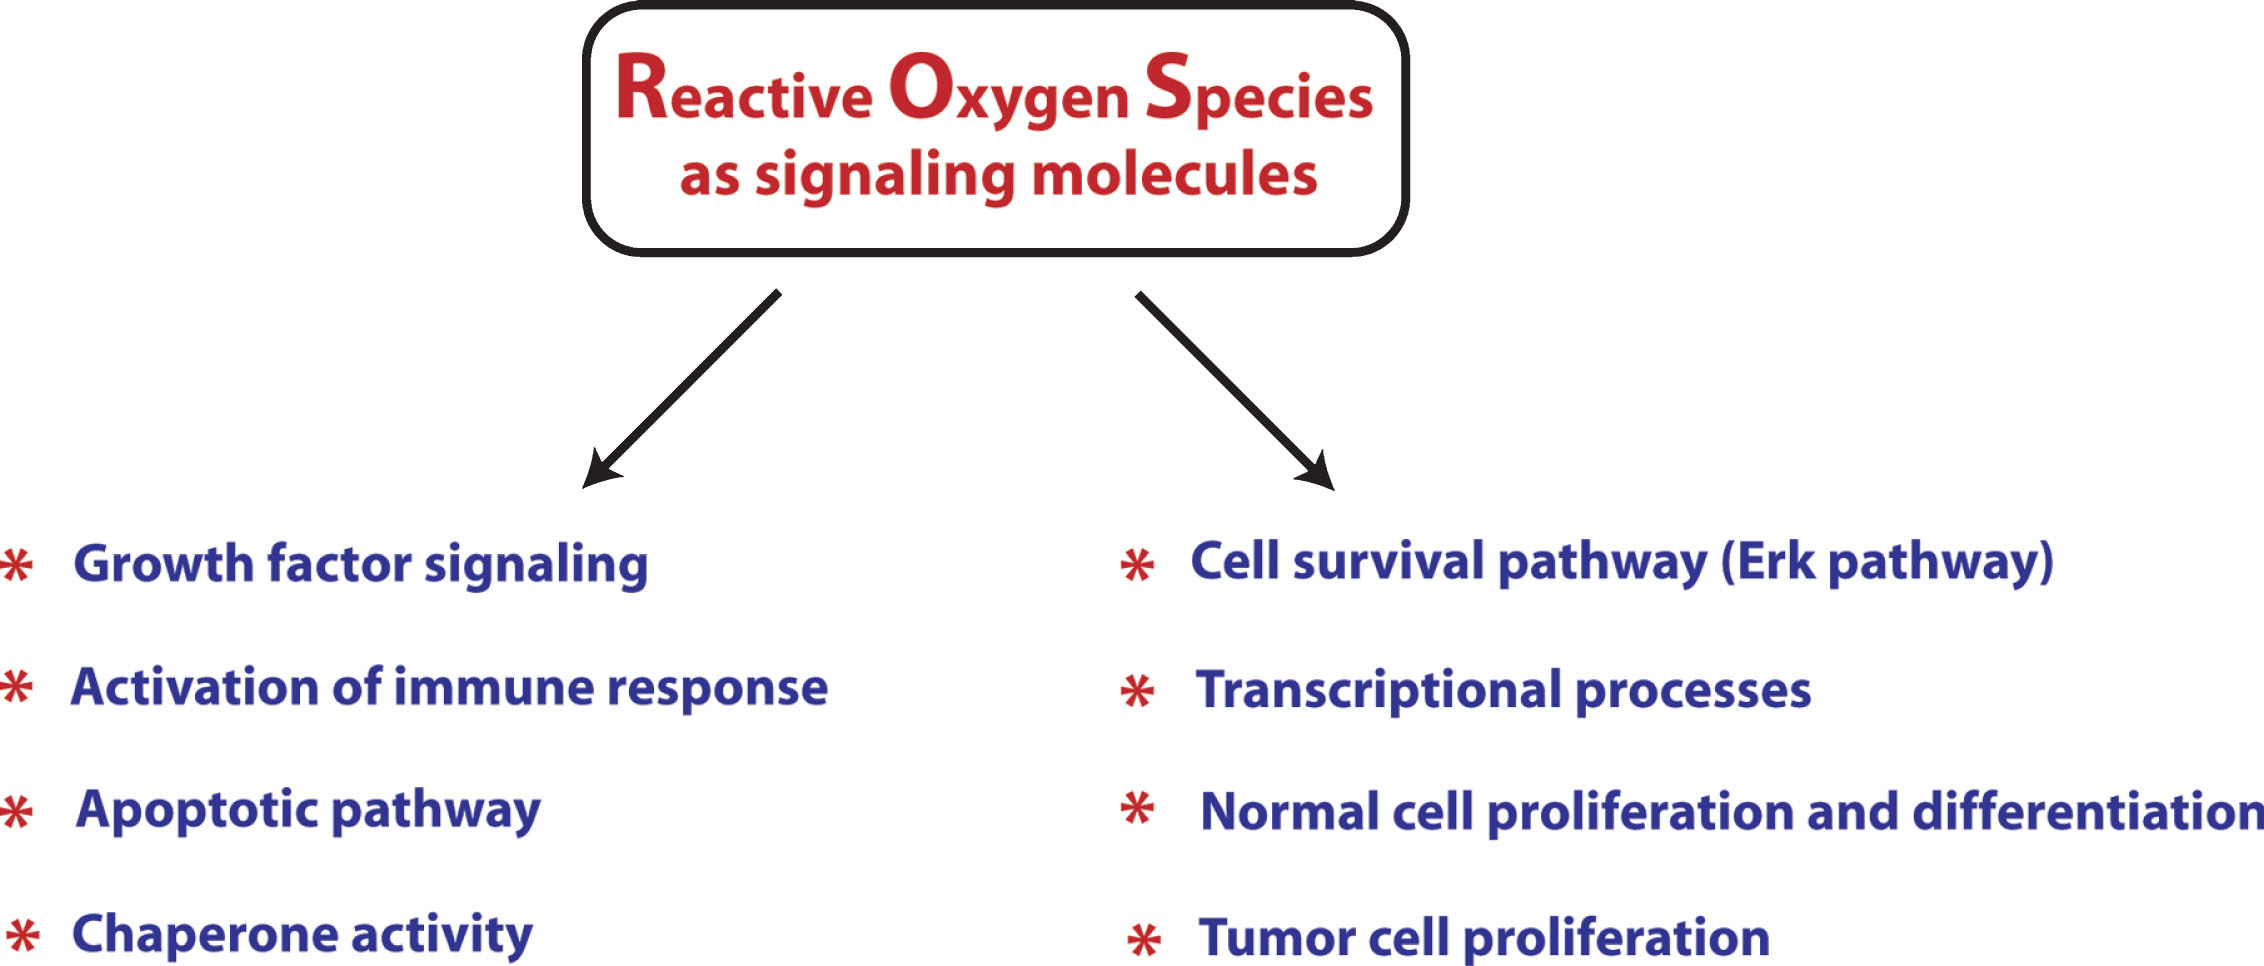 A brief overview of involvement of reactive oxygen species in multiple physiological and pathological functions as signaling molecules. Recent findings have placed ROS as very critical signaling factors which are involved in regulating not only pathological functions but also in a host of functions necessary for normal cellular function. Therefore, a very careful attention is needed before considering antioxidants as therapeutic options for Huntington’s disease.